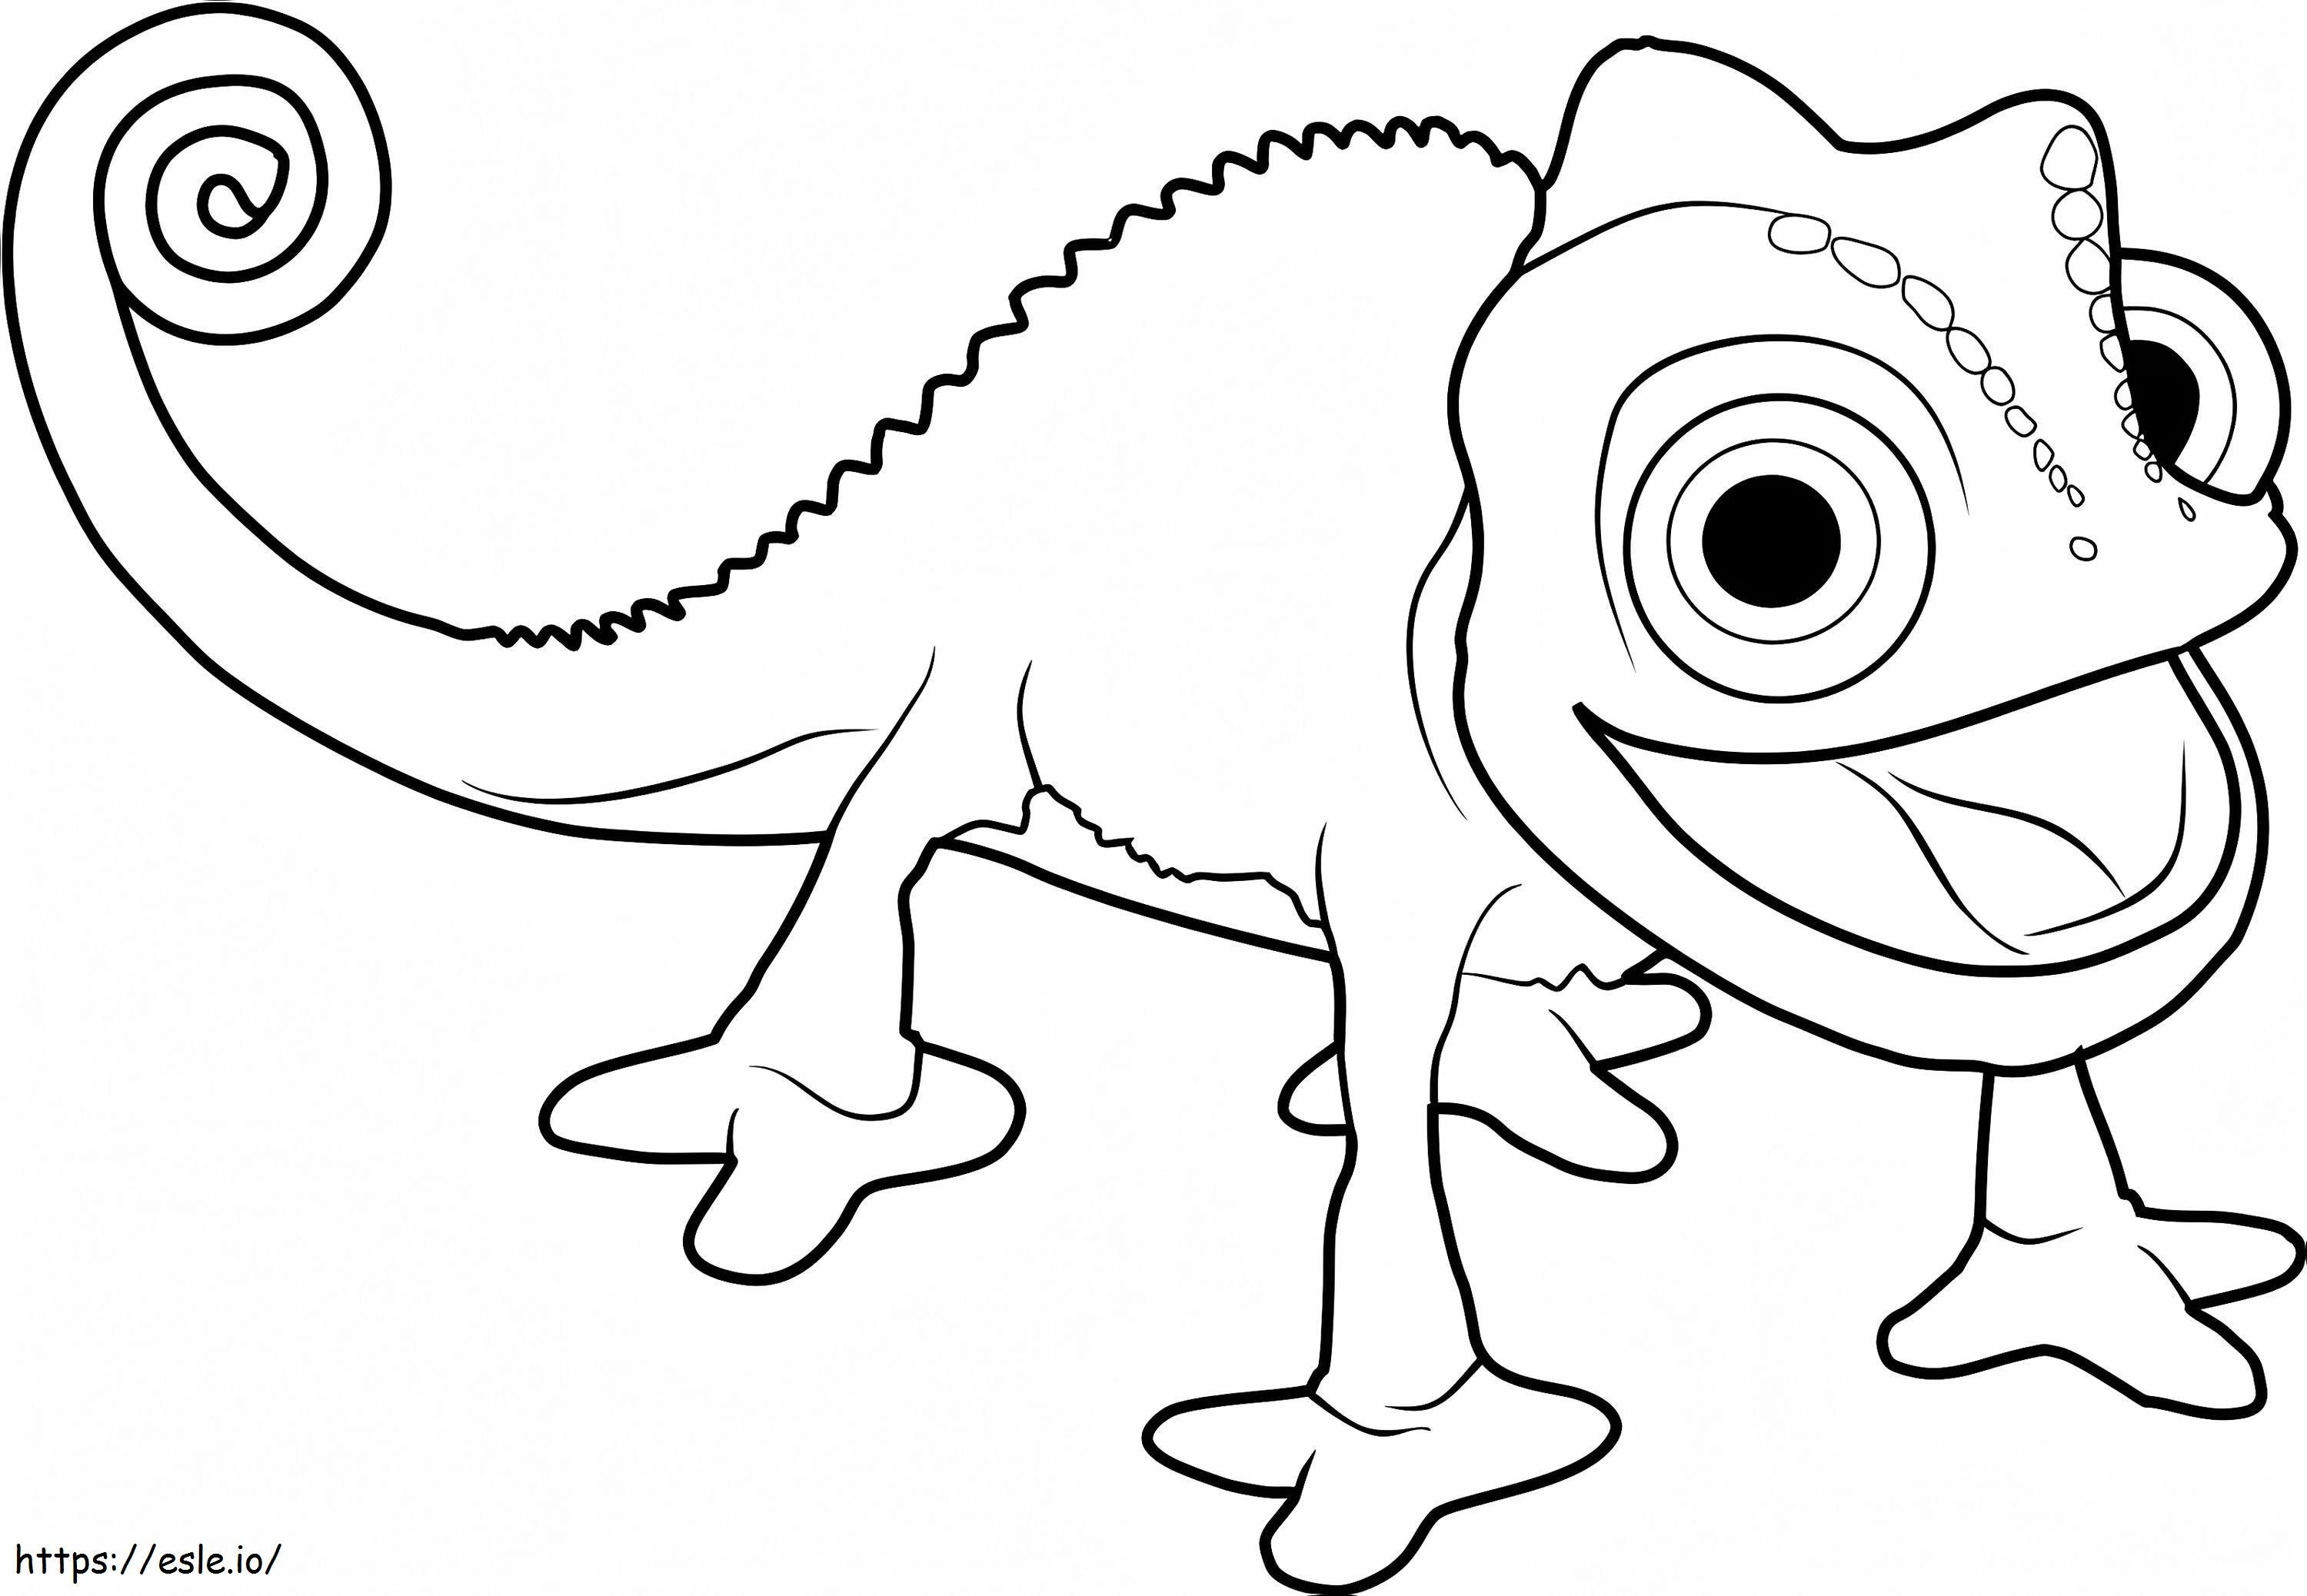 Fun Chameleon 1 coloring page